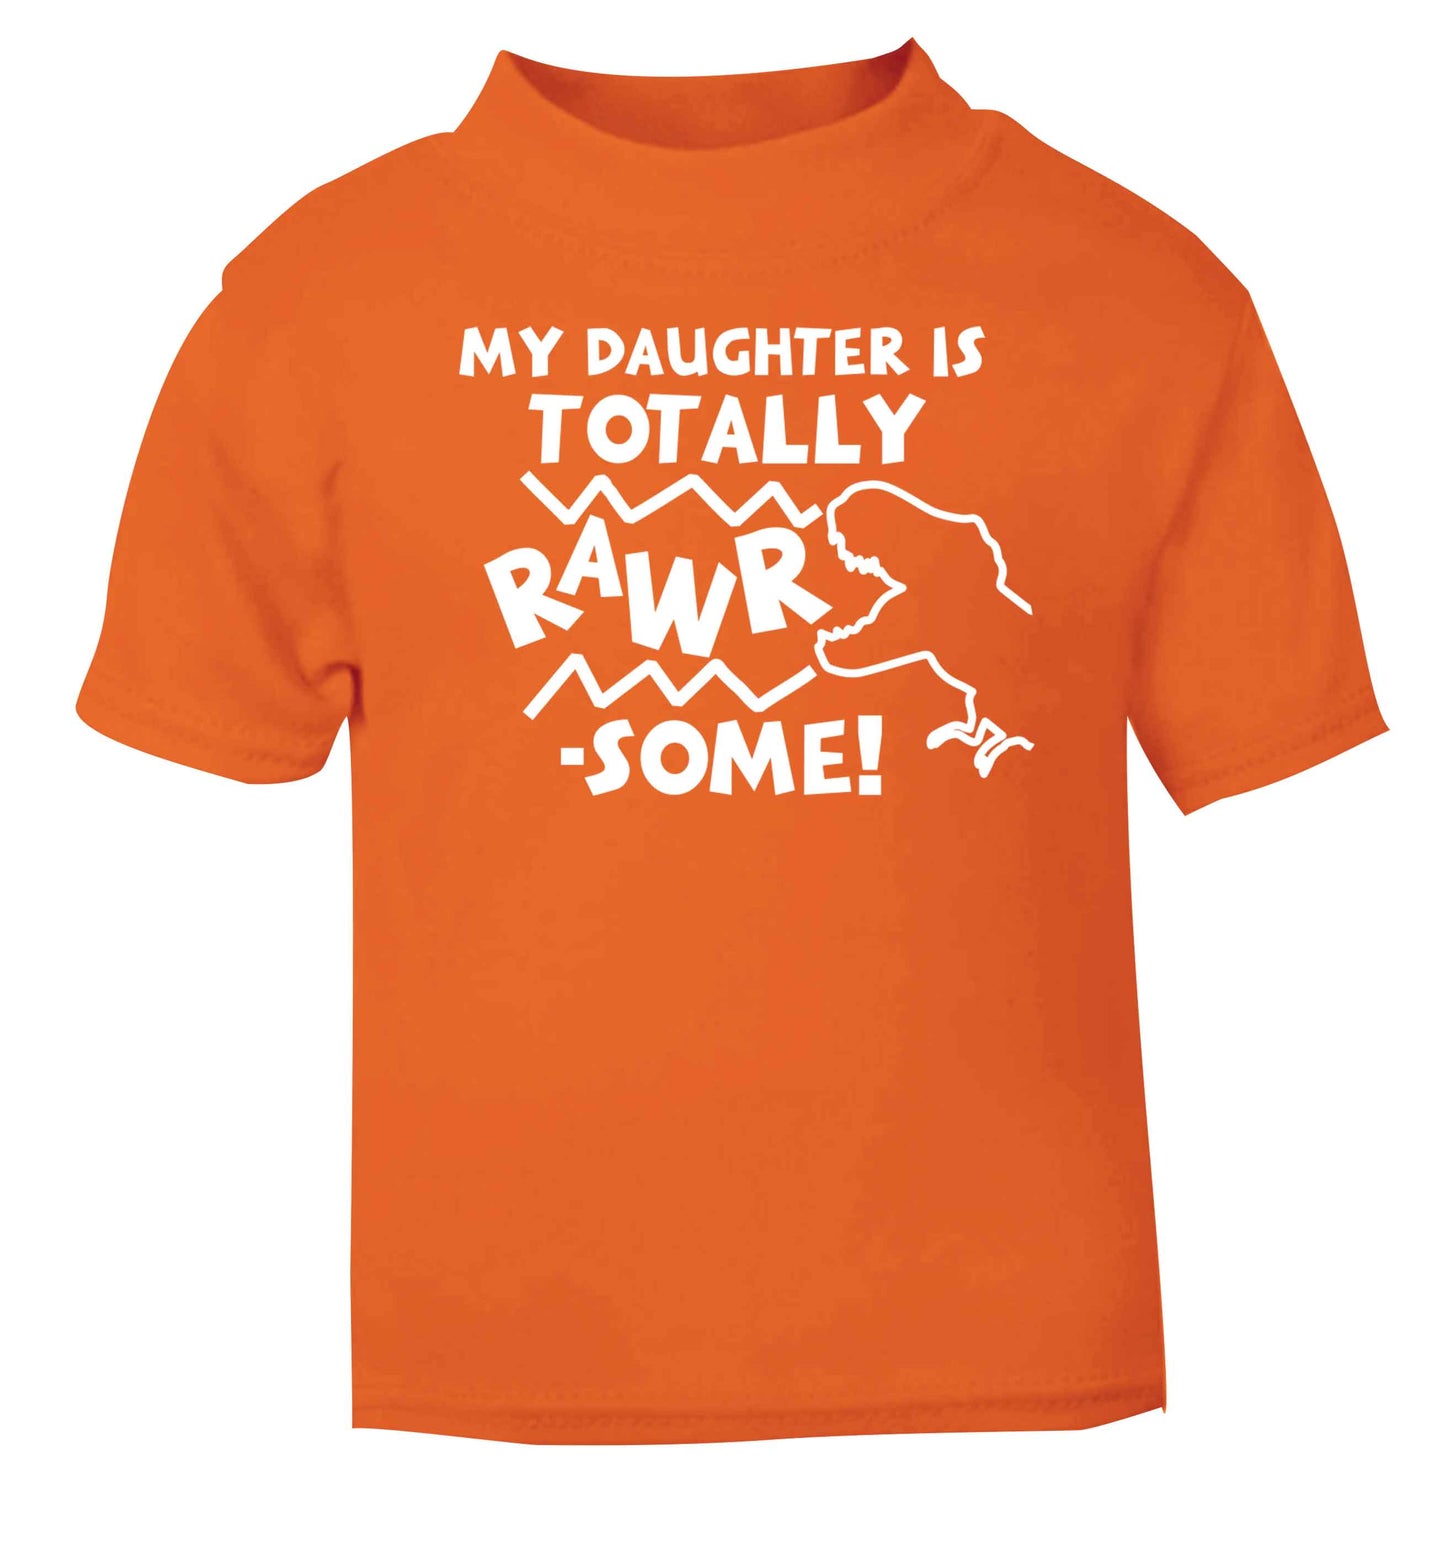 My daughter is totally rawrsome orange baby toddler Tshirt 2 Years